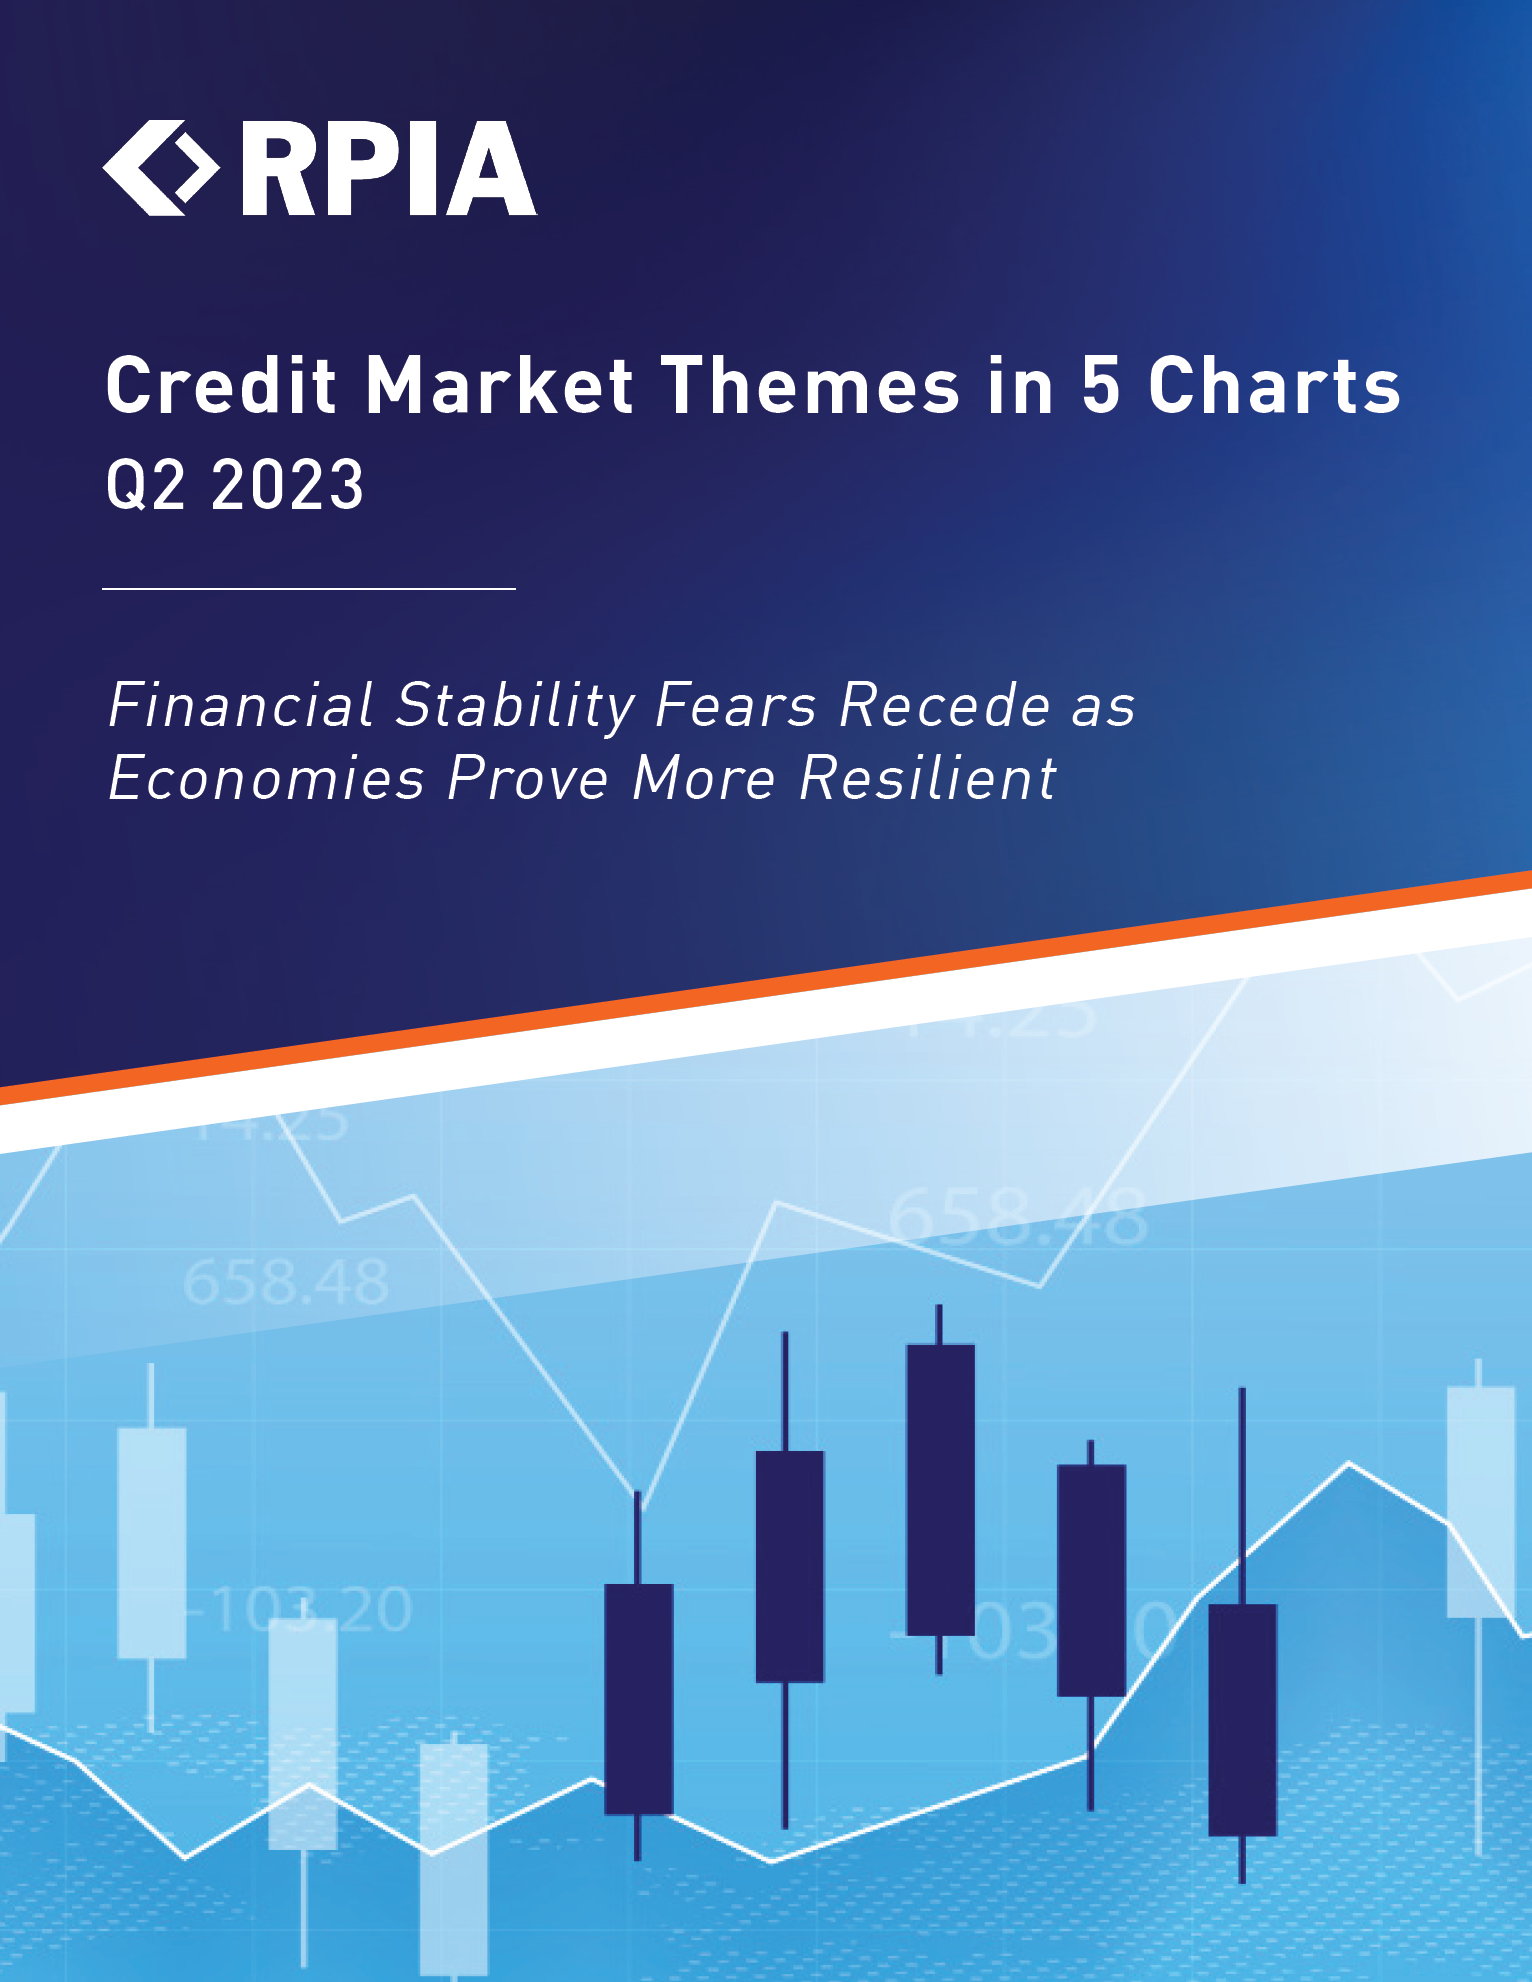 Credit Market Themes in 5 Charts - Q2 2023 - Financial Stability Fears Recede as Economies Prove More Resilient